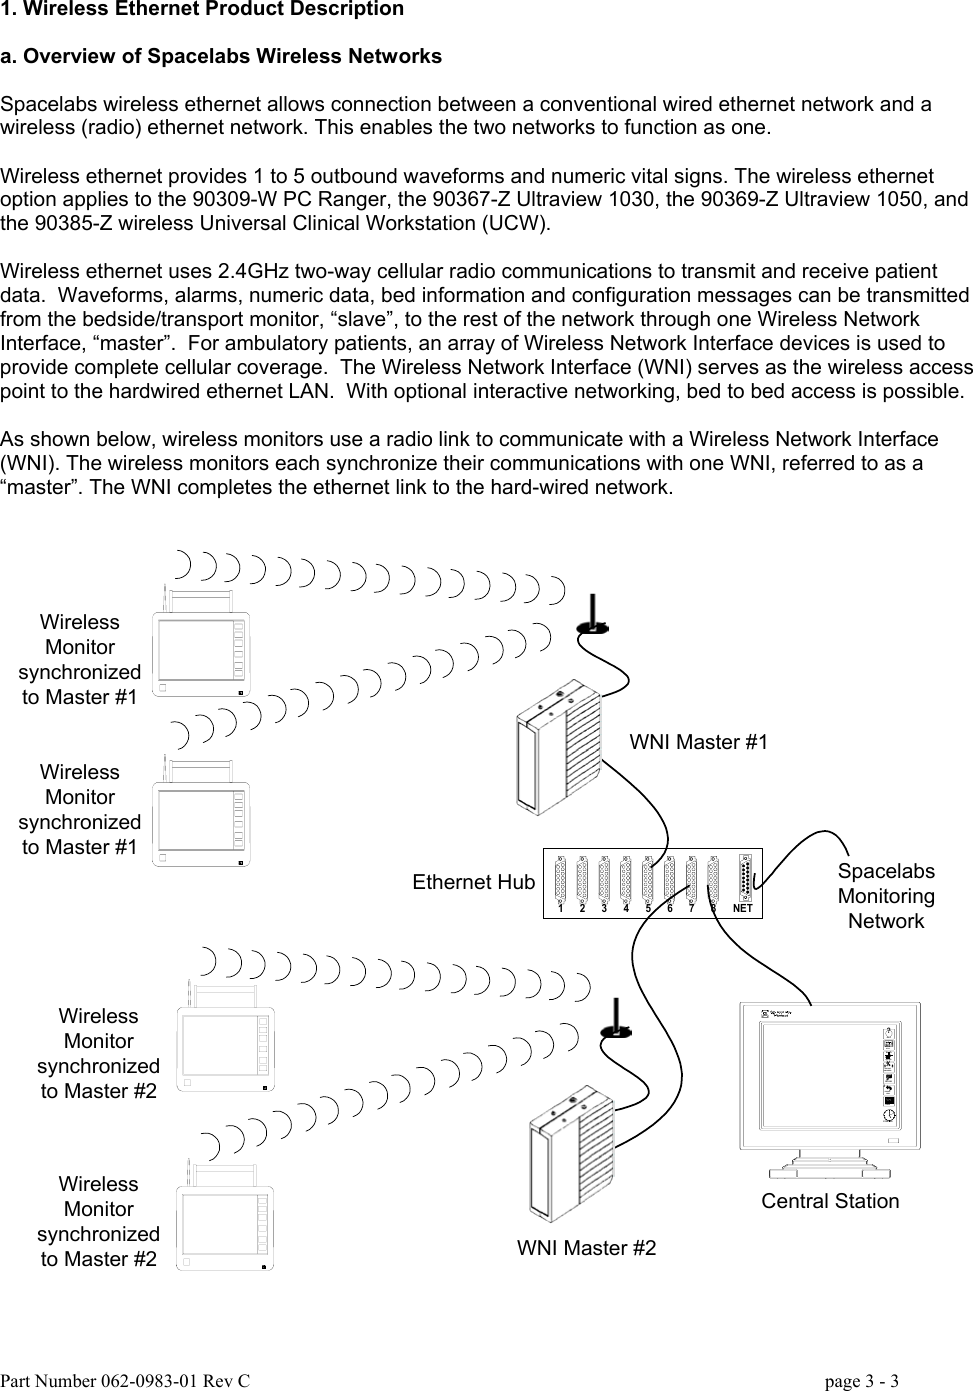 1. Wireless Ethernet Product Description  a. Overview of Spacelabs Wireless Networks   Spacelabs wireless ethernet allows connection between a conventional wired ethernet network and a wireless (radio) ethernet network. This enables the two networks to function as one.  Wireless ethernet provides 1 to 5 outbound waveforms and numeric vital signs. The wireless ethernet option applies to the 90309-W PC Ranger, the 90367-Z Ultraview 1030, the 90369-Z Ultraview 1050, and the 90385-Z wireless Universal Clinical Workstation (UCW).  Wireless ethernet uses 2.4GHz two-way cellular radio communications to transmit and receive patient data.  Waveforms, alarms, numeric data, bed information and configuration messages can be transmitted from the bedside/transport monitor, “slave”, to the rest of the network through one Wireless Network Interface, “master”.  For ambulatory patients, an array of Wireless Network Interface devices is used to provide complete cellular coverage.  The Wireless Network Interface (WNI) serves as the wireless access point to the hardwired ethernet LAN.  With optional interactive networking, bed to bed access is possible.  As shown below, wireless monitors use a radio link to communicate with a Wireless Network Interface (WNI). The wireless monitors each synchronize their communications with one WNI, referred to as a “master”. The WNI completes the ethernet link to the hard-wired network.   21 FEB 1994HELP?MONITORSETUPNORMALSCREENRX%4SPECIALFUNCTIONSRECORD%XTONE RESETALM SUSPEND33PREVIOUSMENU12345678NETWNI Master #1WNI Master #2Central StationEthernet HubWirelessMonitorsynchronizedto Master #1WirelessMonitorsynchronizedto Master #1WirelessMonitorsynchronizedto Master #2WirelessMonitorsynchronizedto Master #2SpacelabsMonitoringNetwork   Part Number 062-0983-01 Rev C   page 3 - 3   